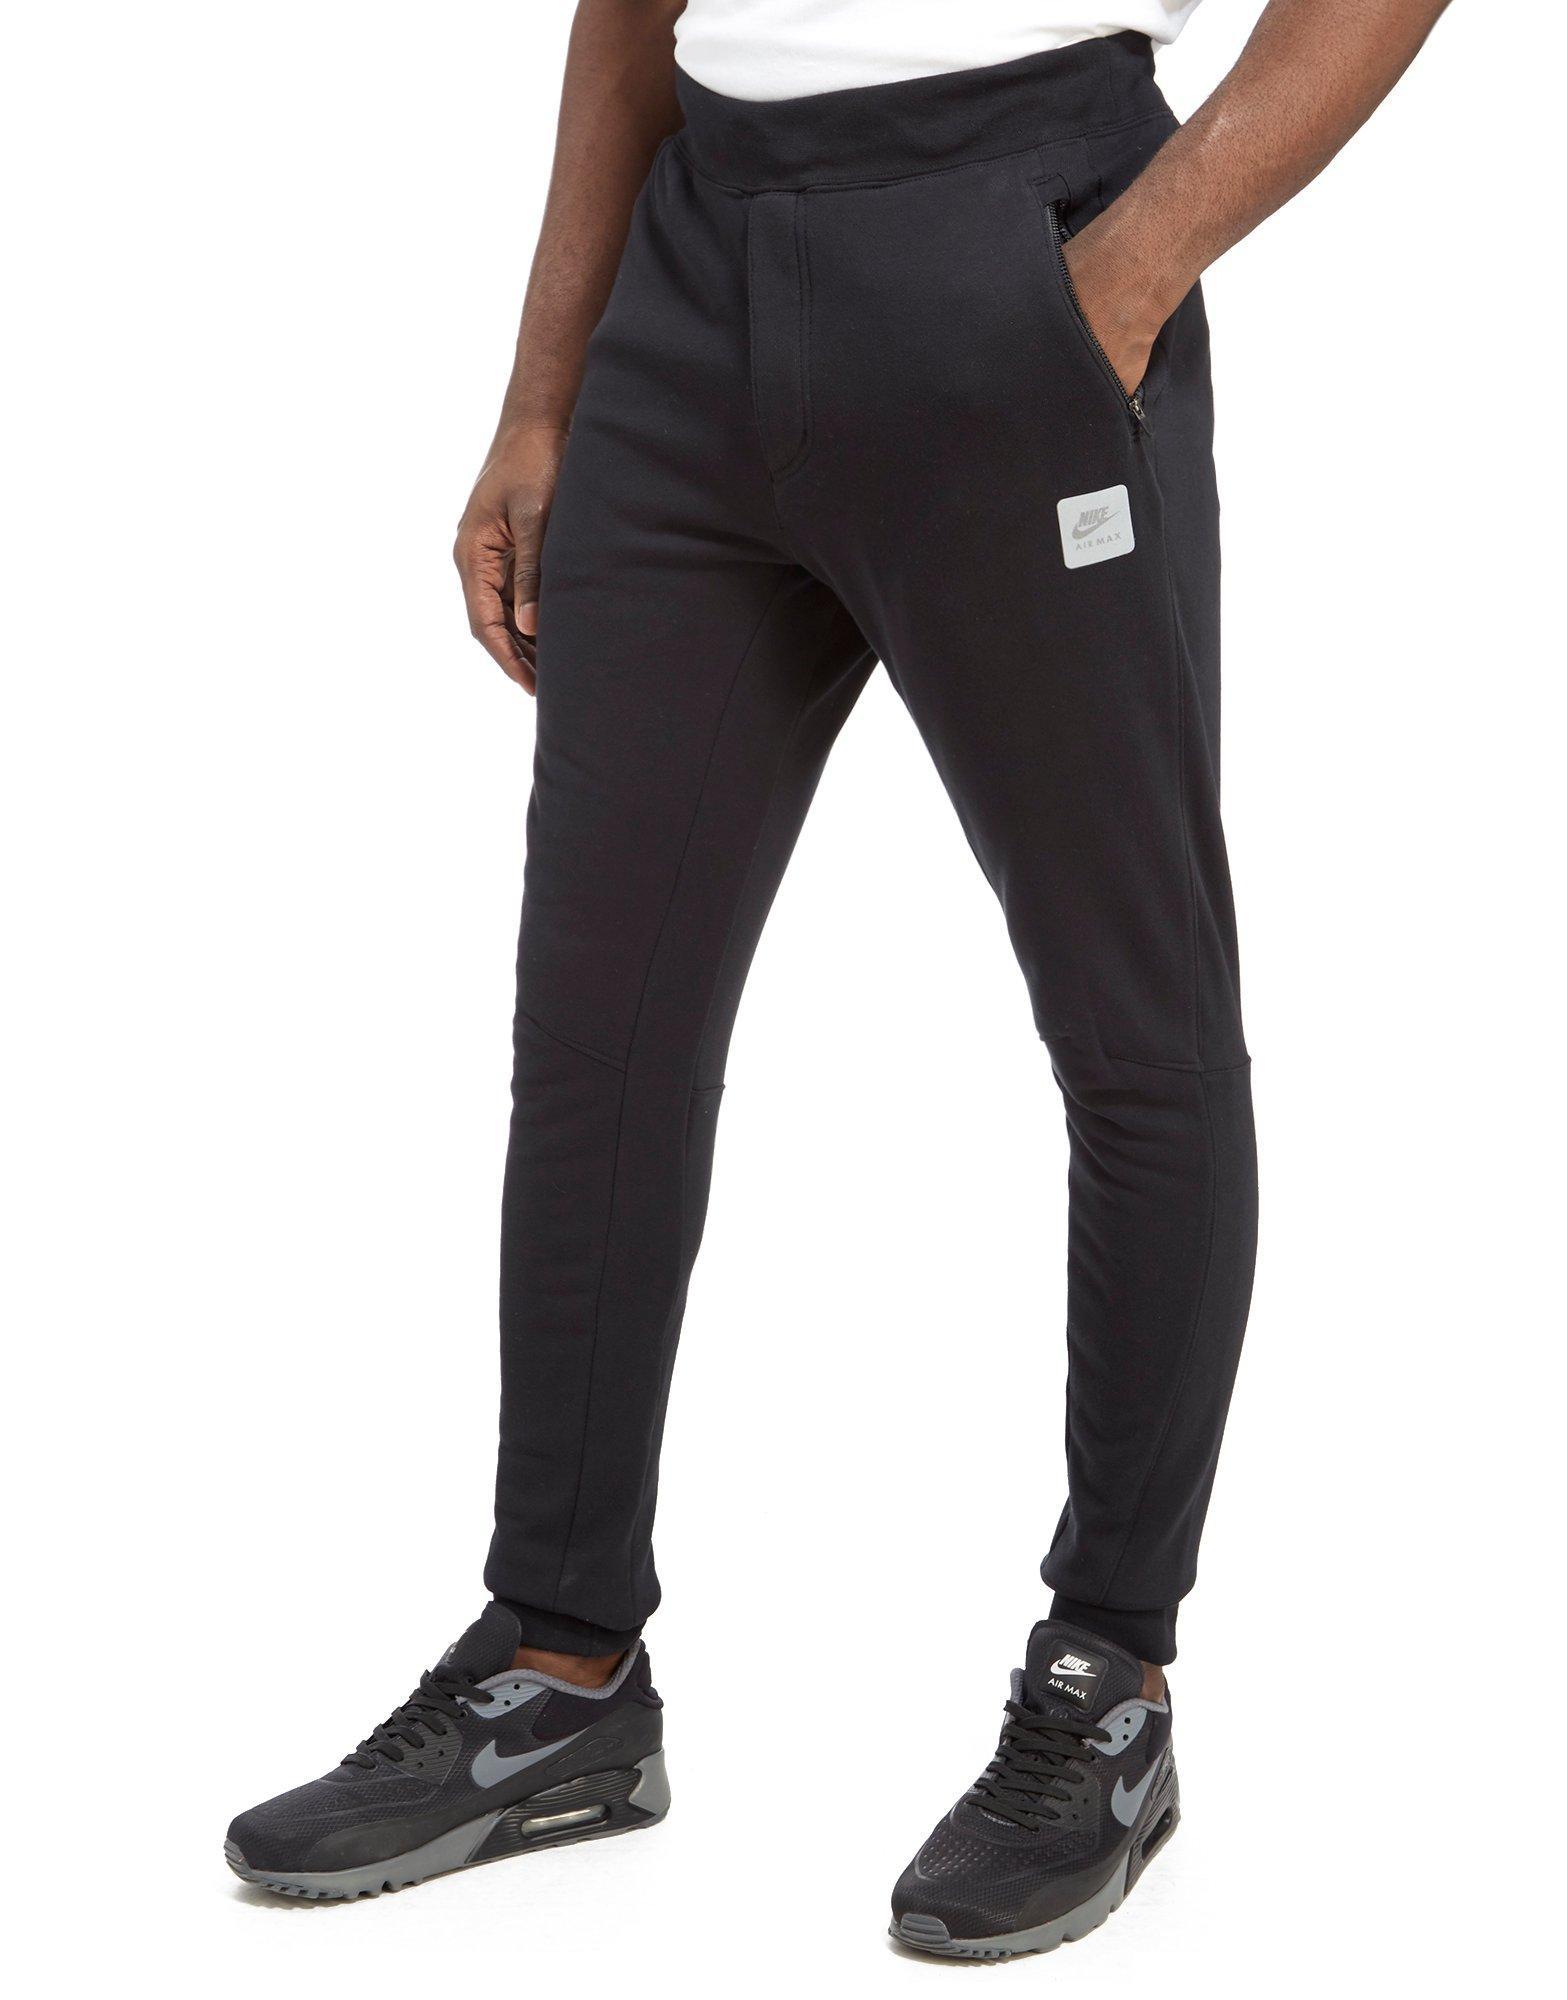 nike air max pants Online Shopping for 